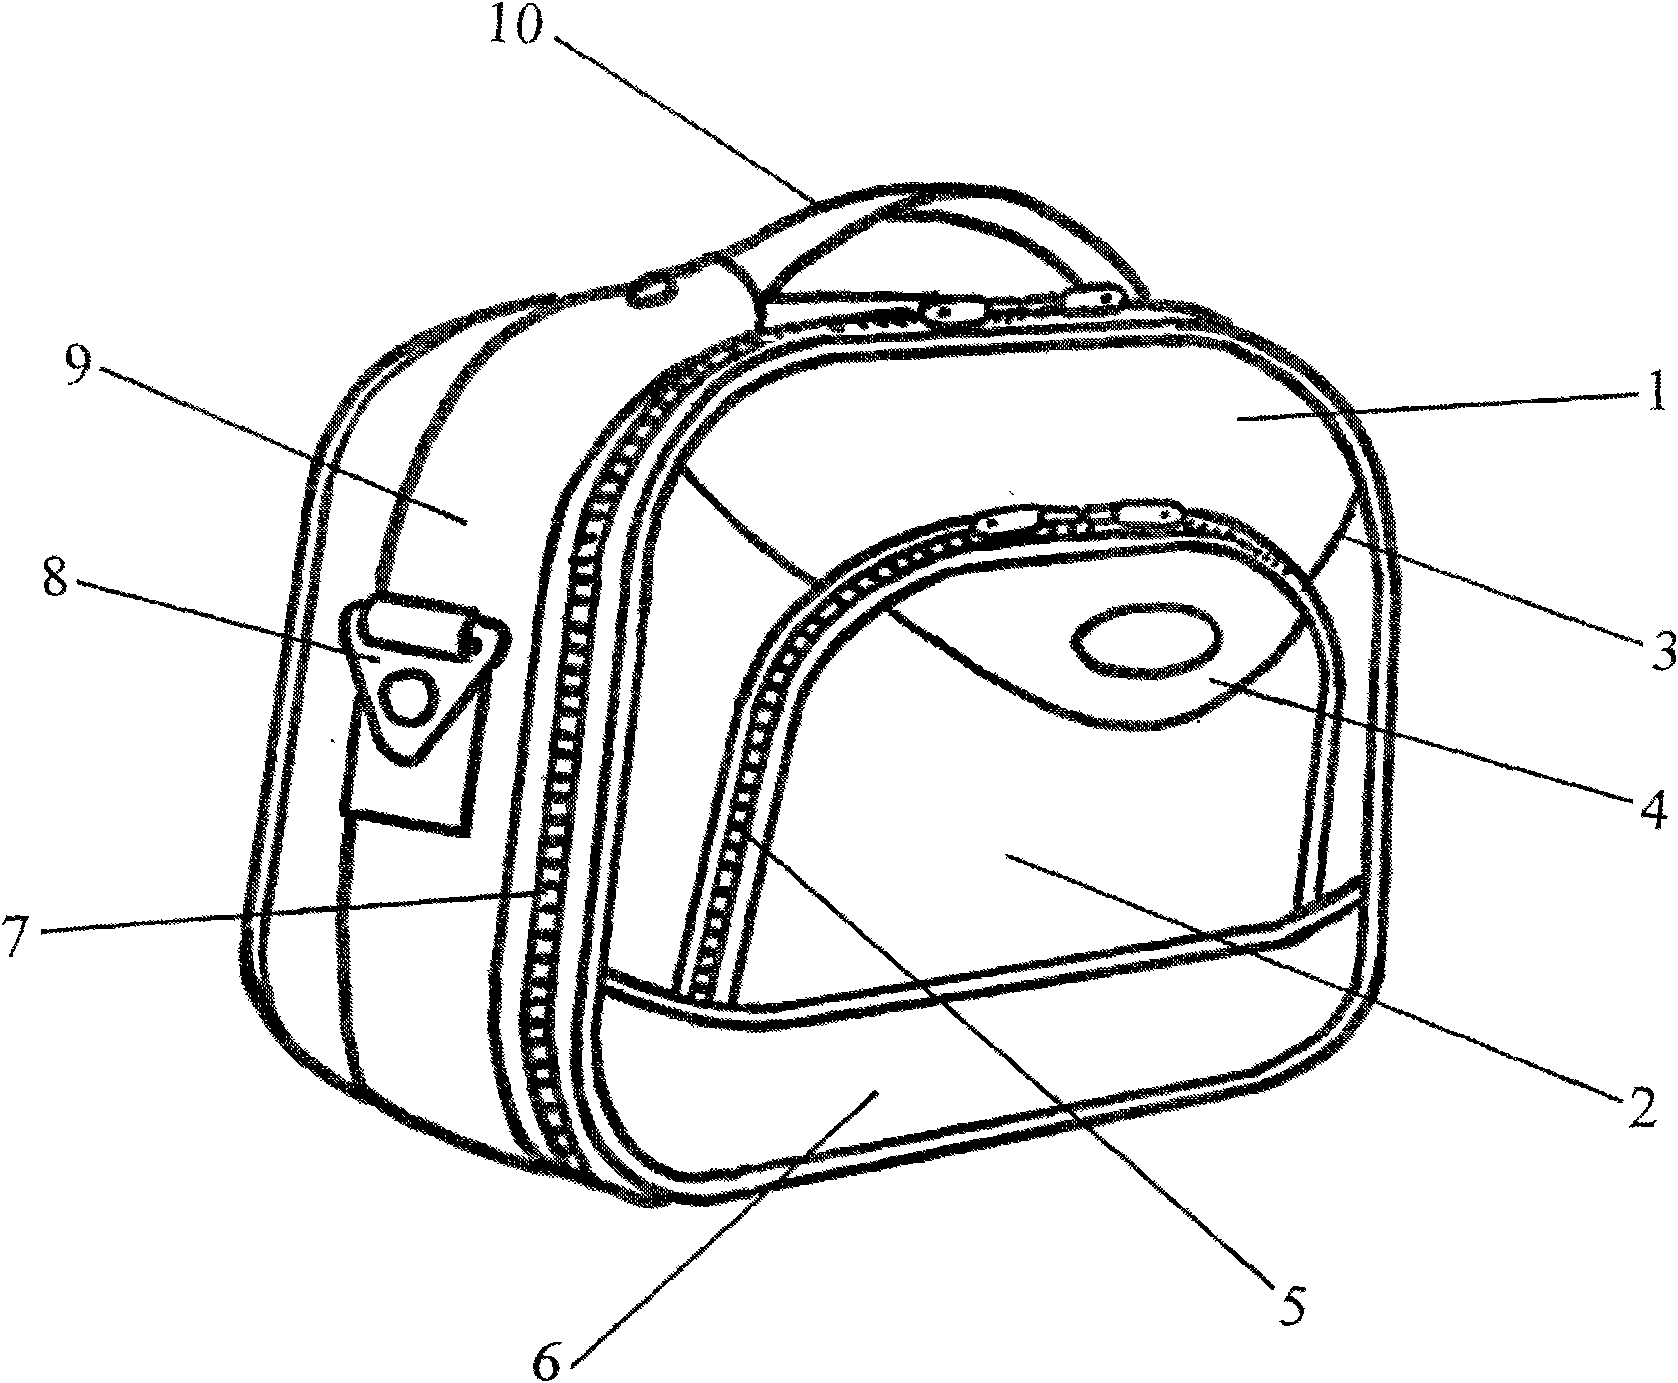 Hand bag with suspender loop and casing tape